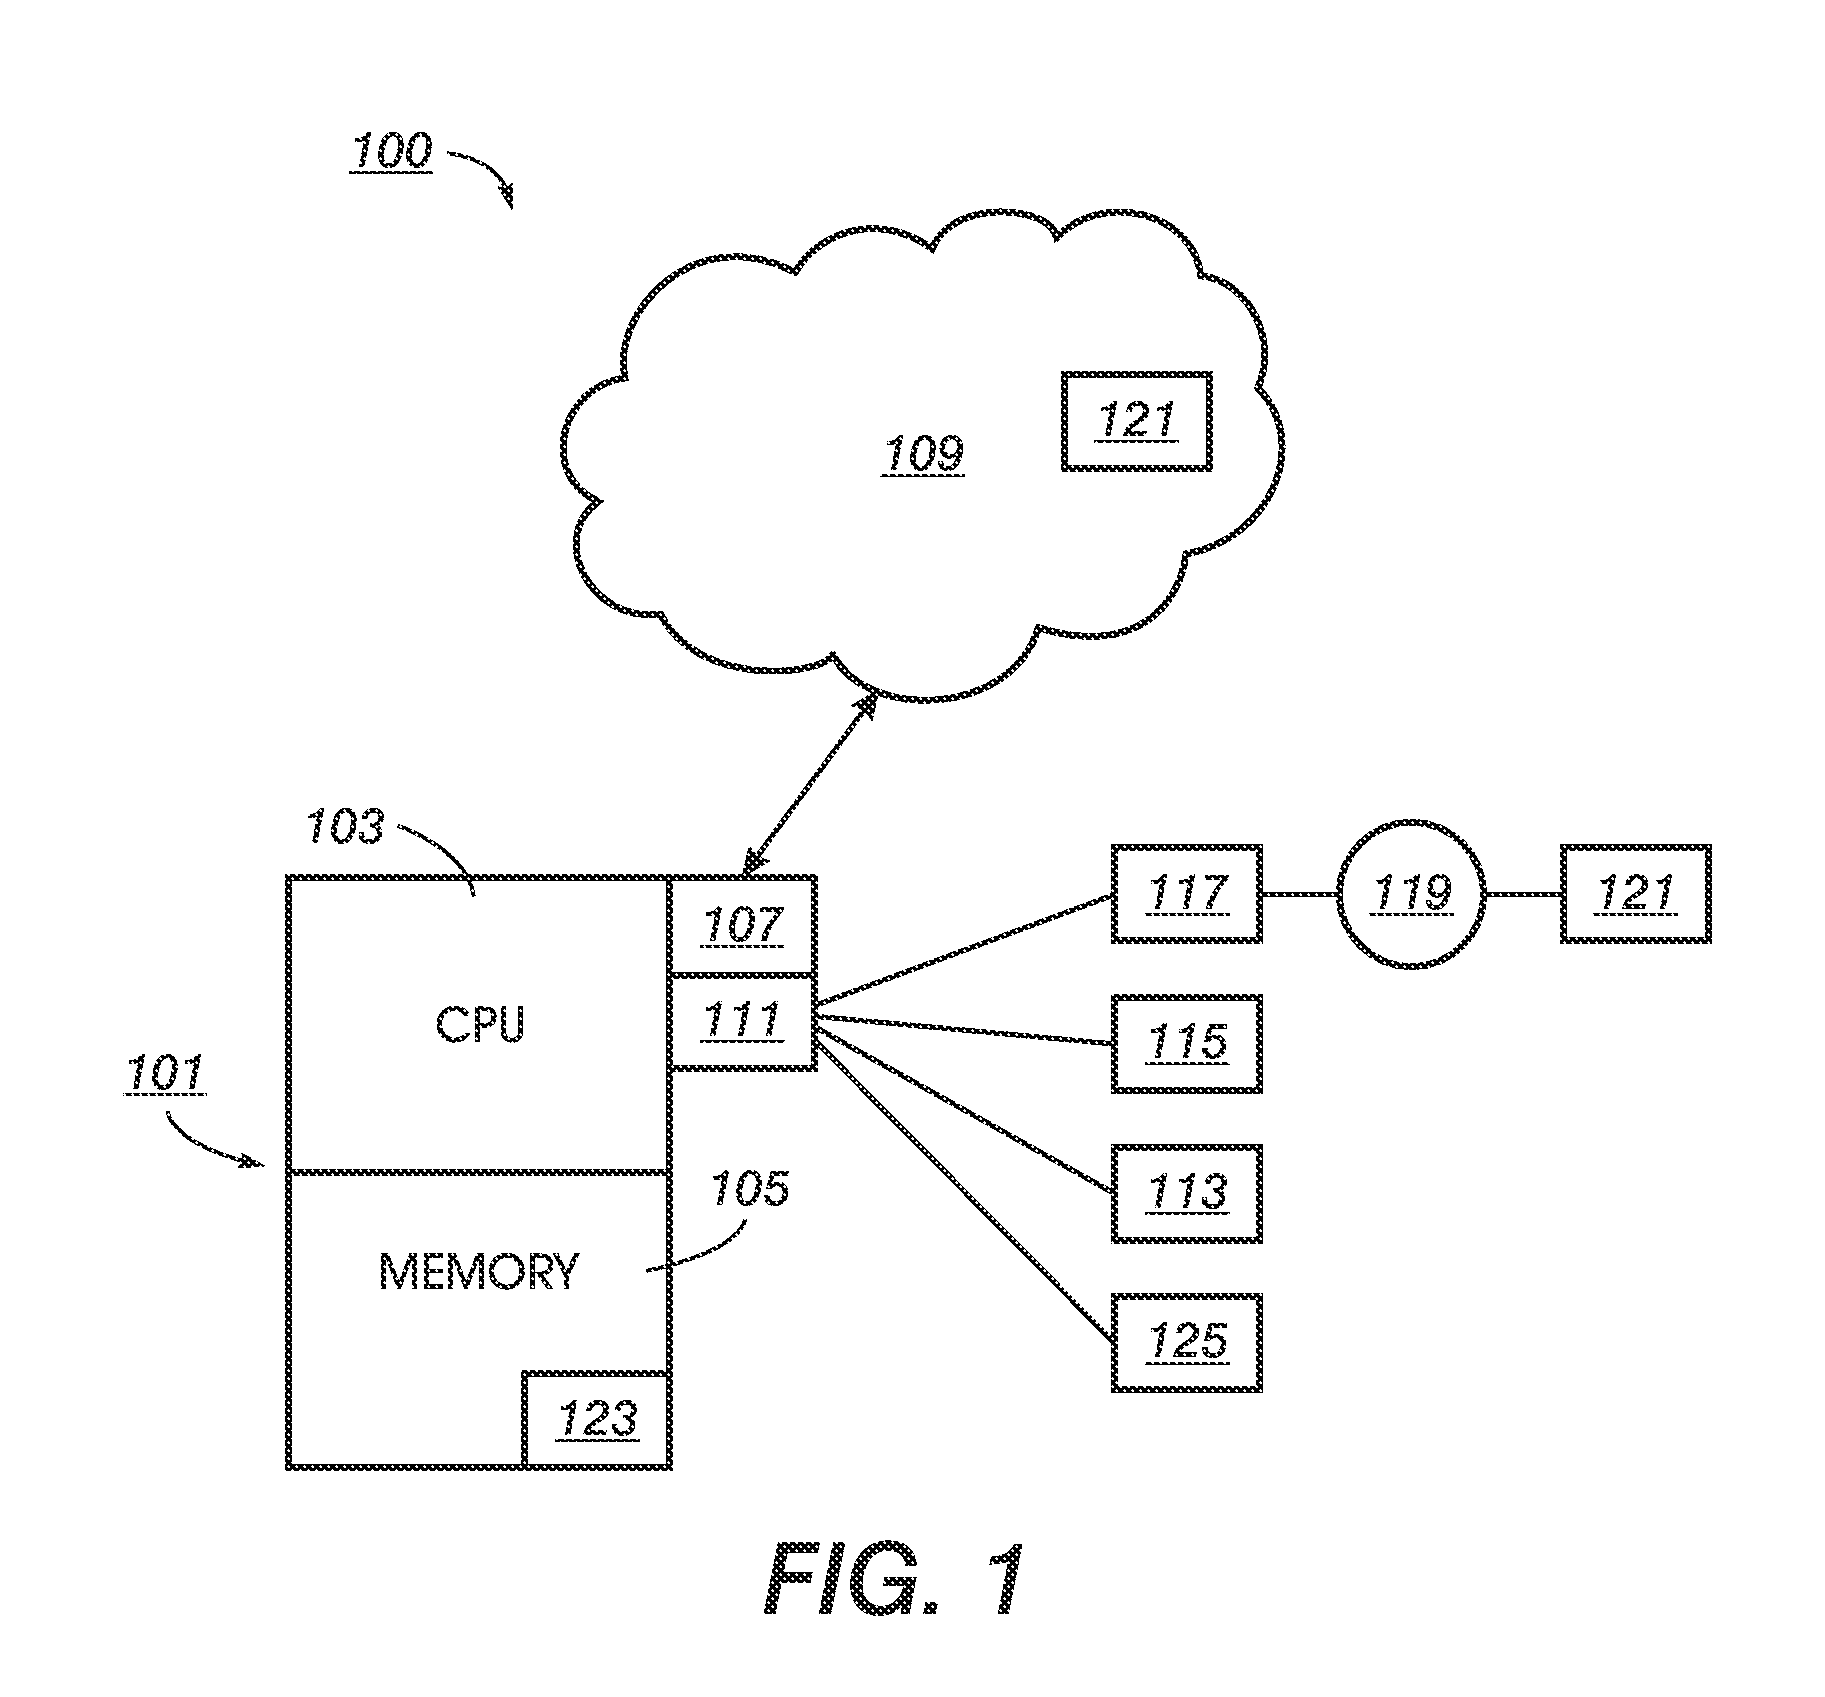 Method, apparatus, and program product for efficiently adding entities and relationships in a comprehension state of a collection of information